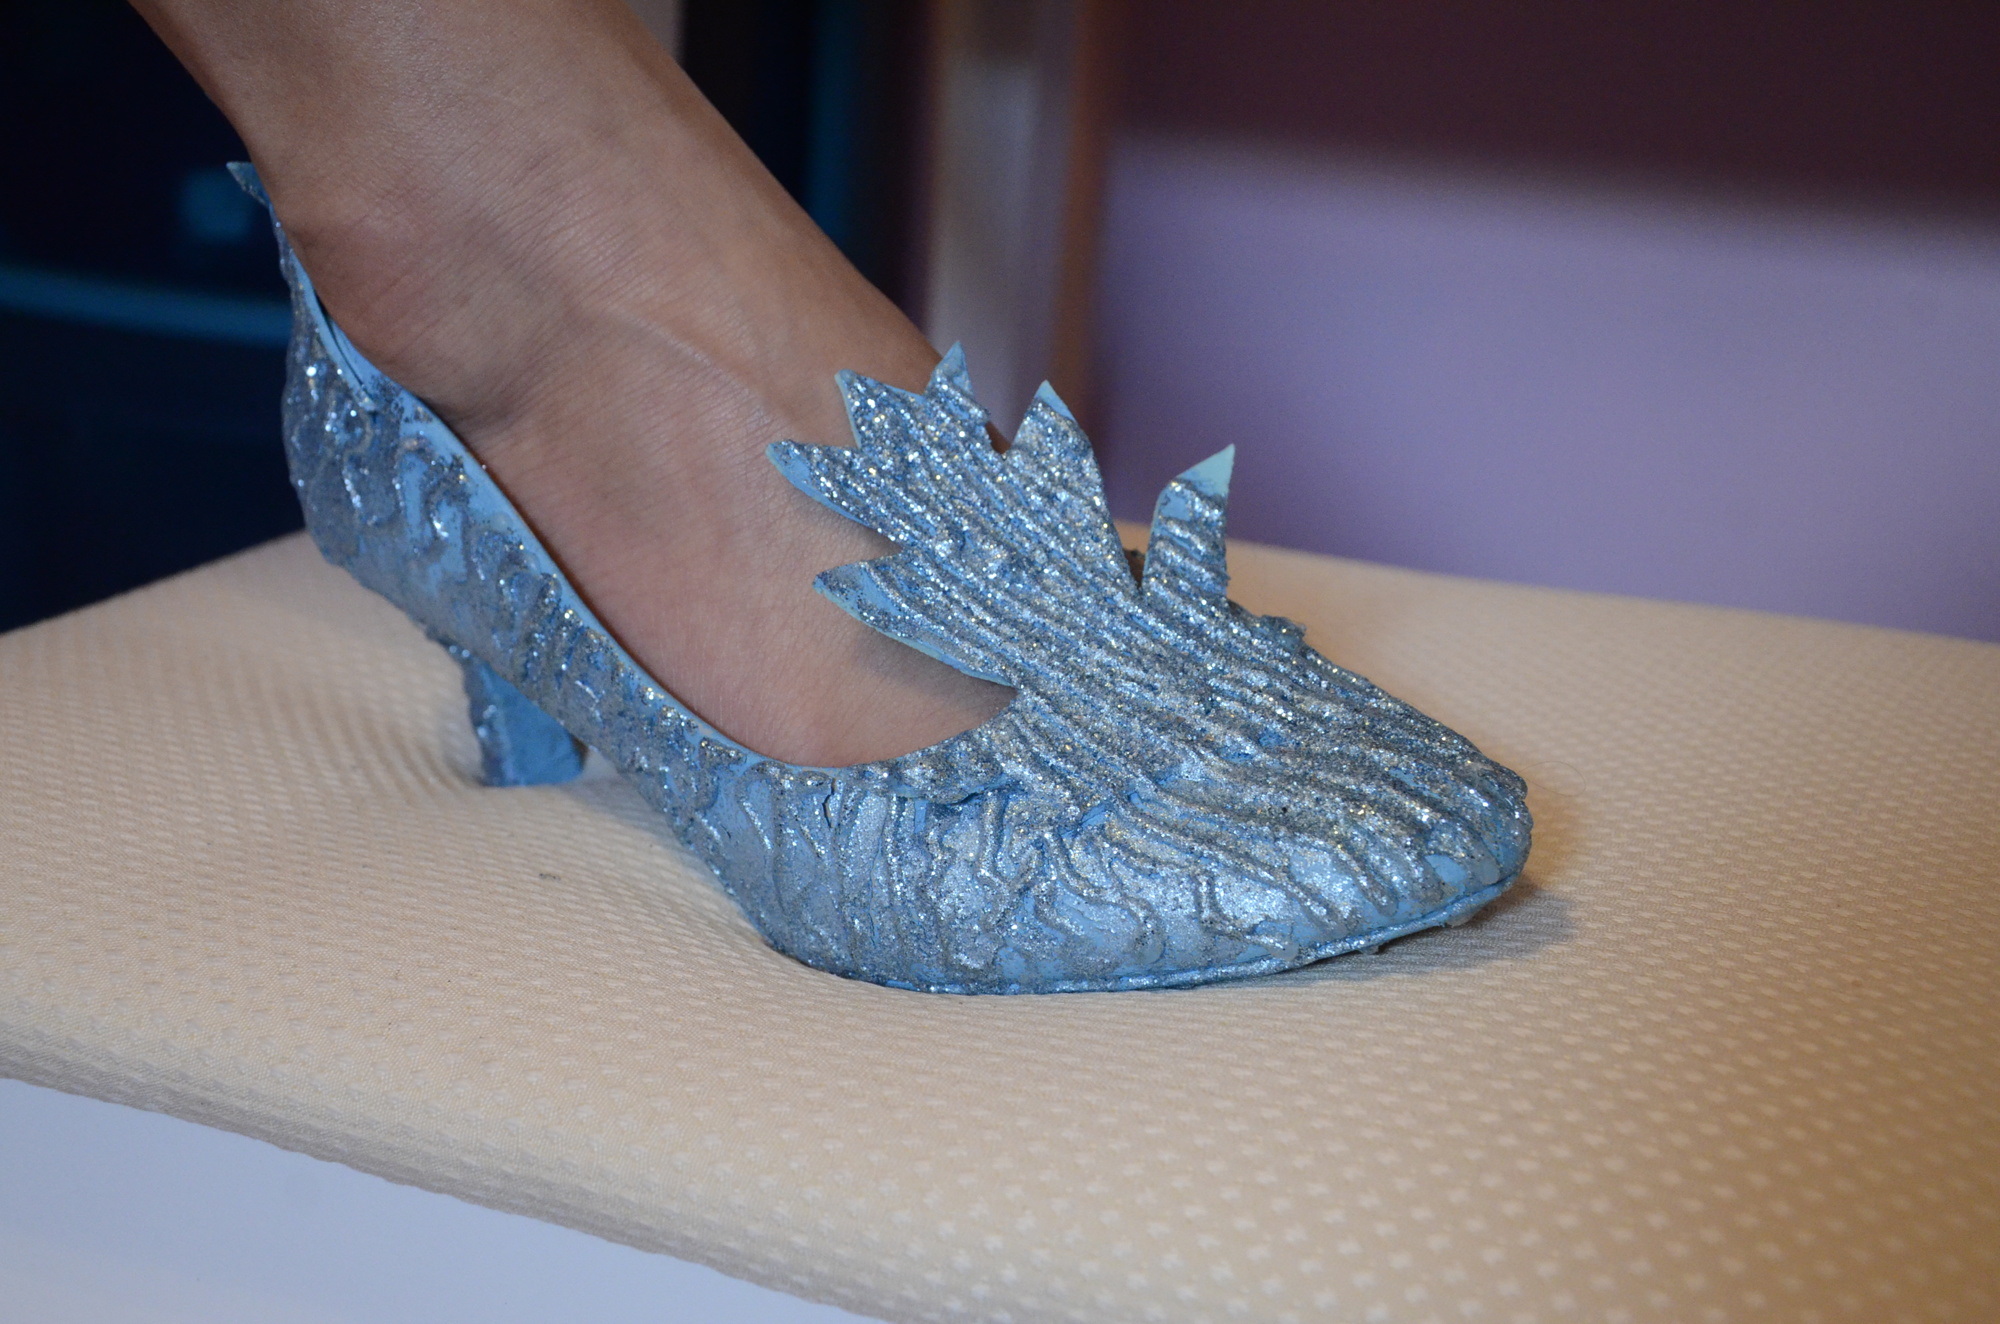 Although Belle purchases the bulk of her costumes, she still designs some pieces herself, including these shoes for her Elsa costume.